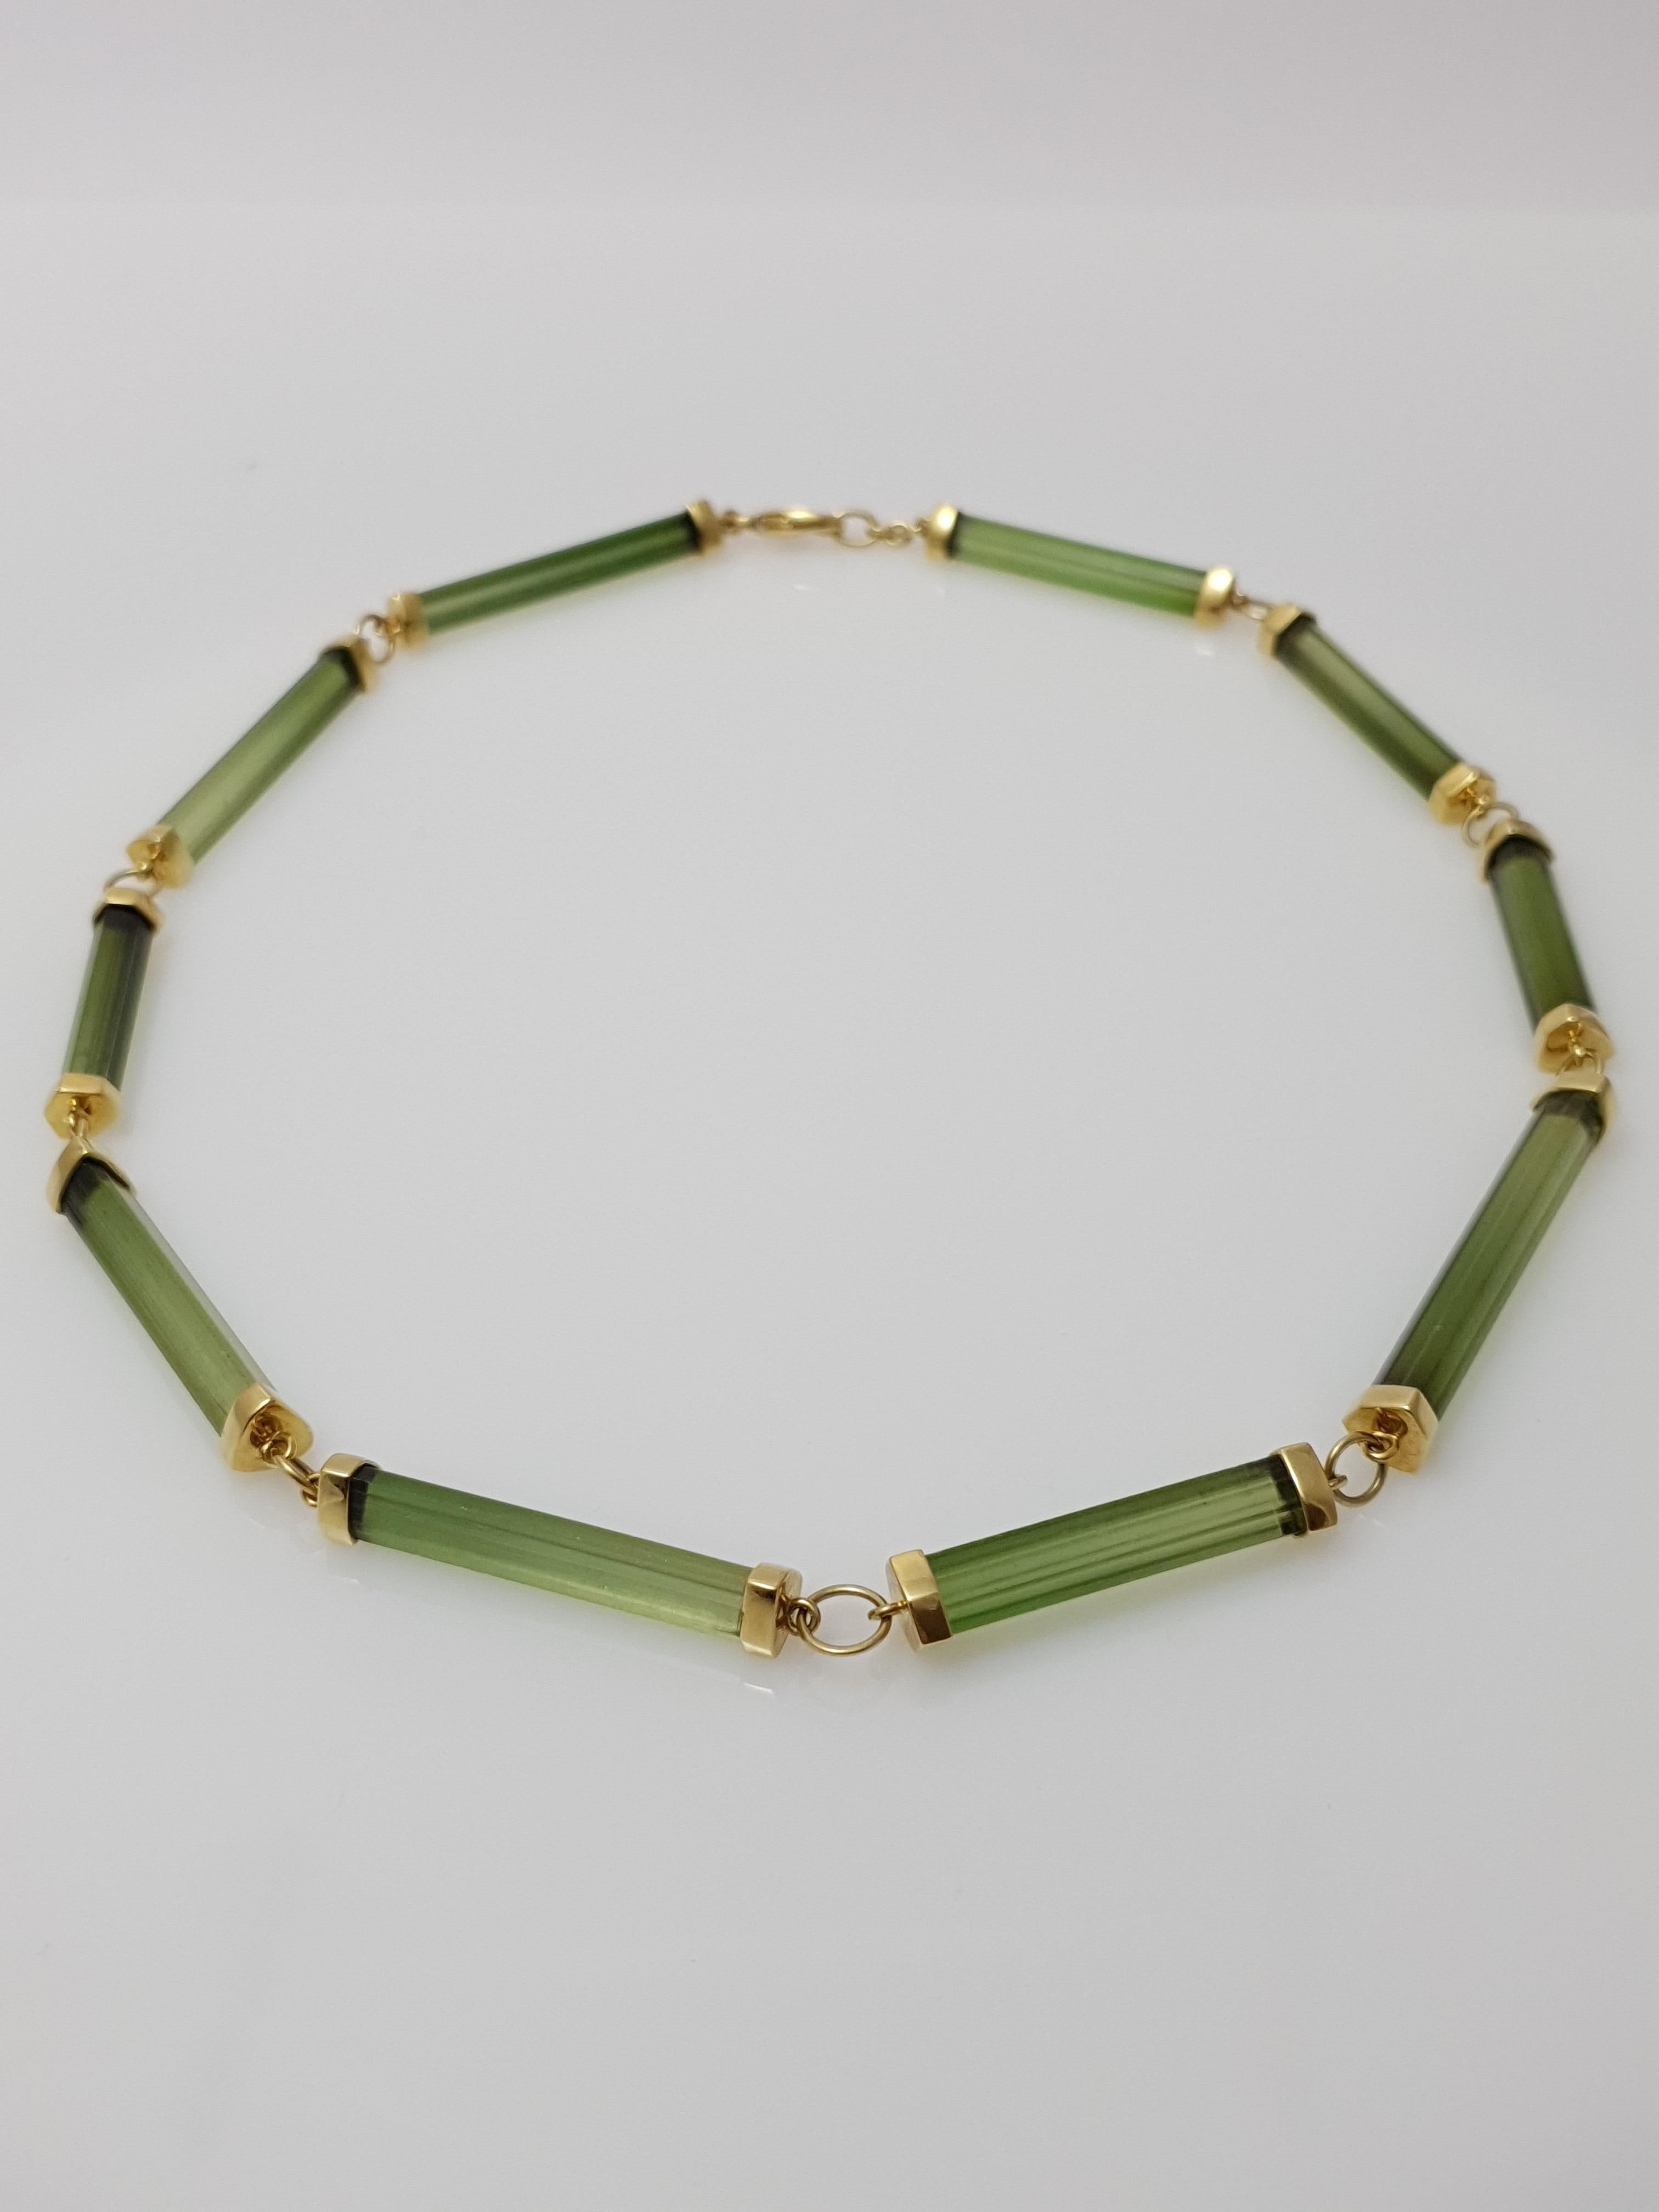 Women's Green Tourmaline Crystal Beaded Necklace with 18 Carat Yellow Gold/Diamonds For Sale